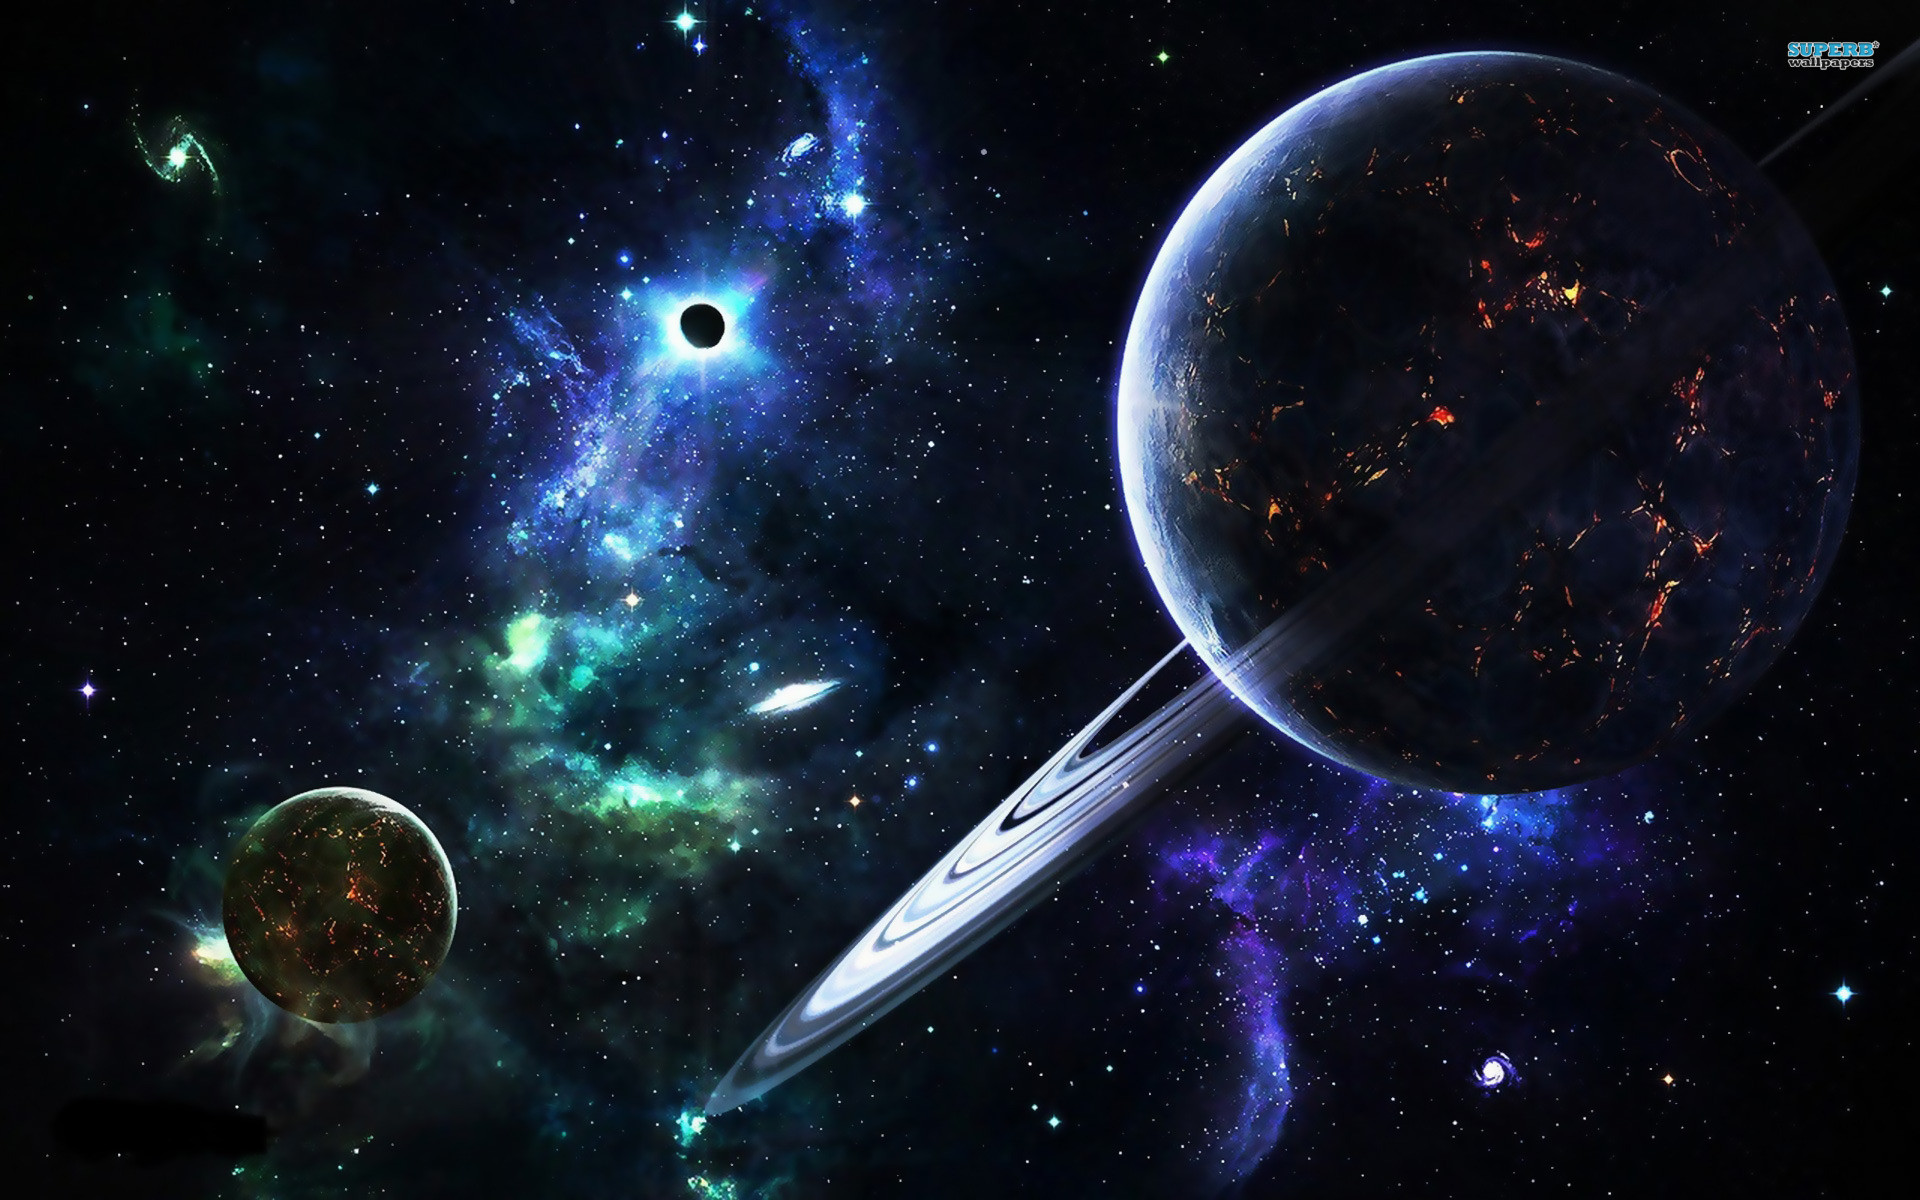 HD Wallpaper and background photos of Space Art Wallpaper for fans of Space images